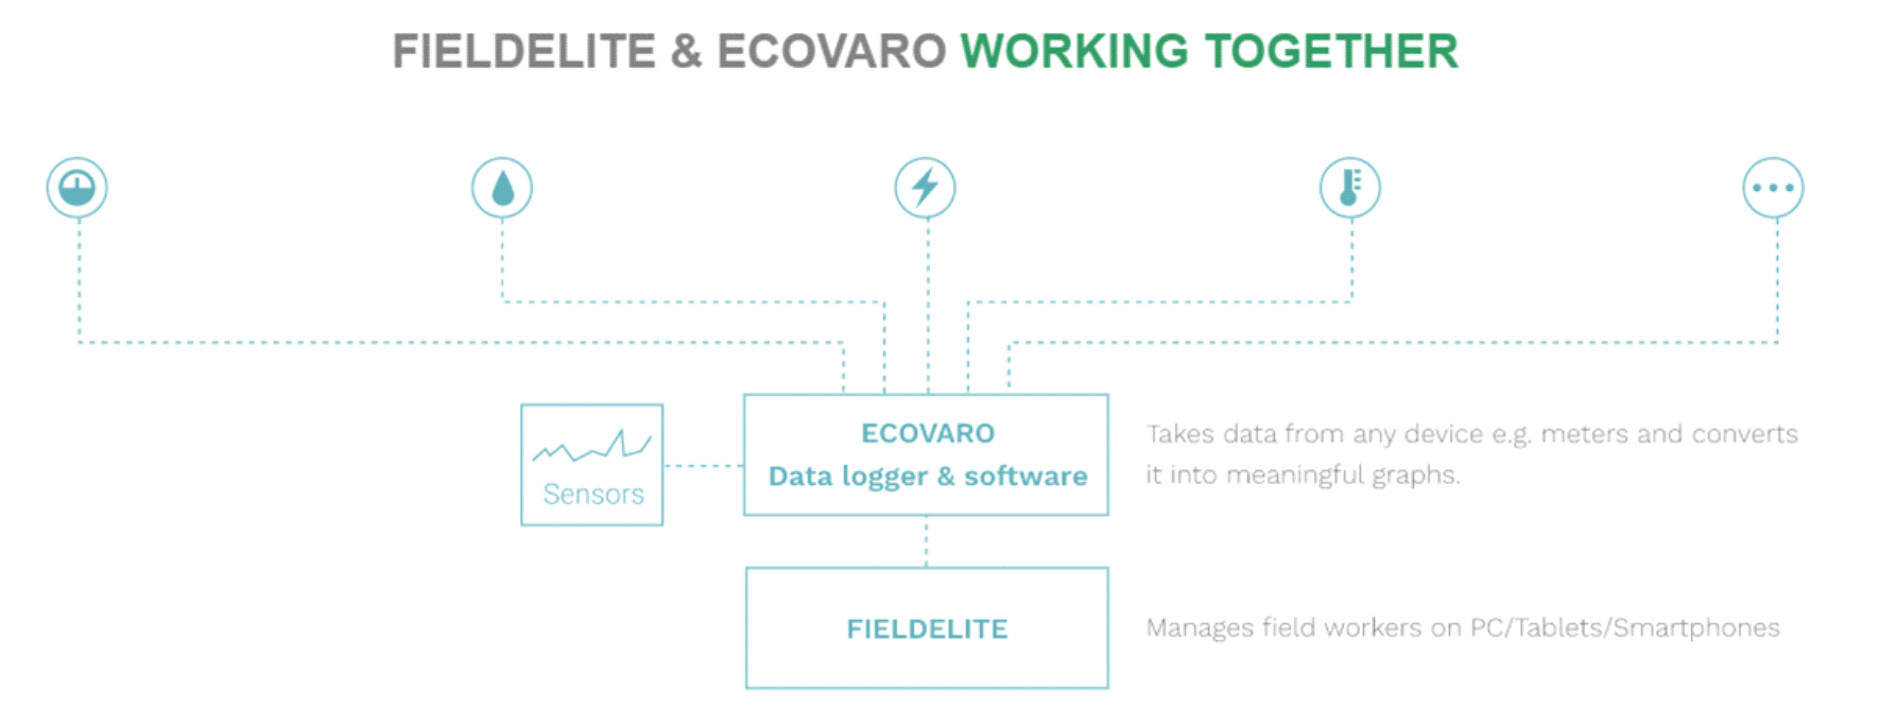 FieldElite and Ecovaro Working Together